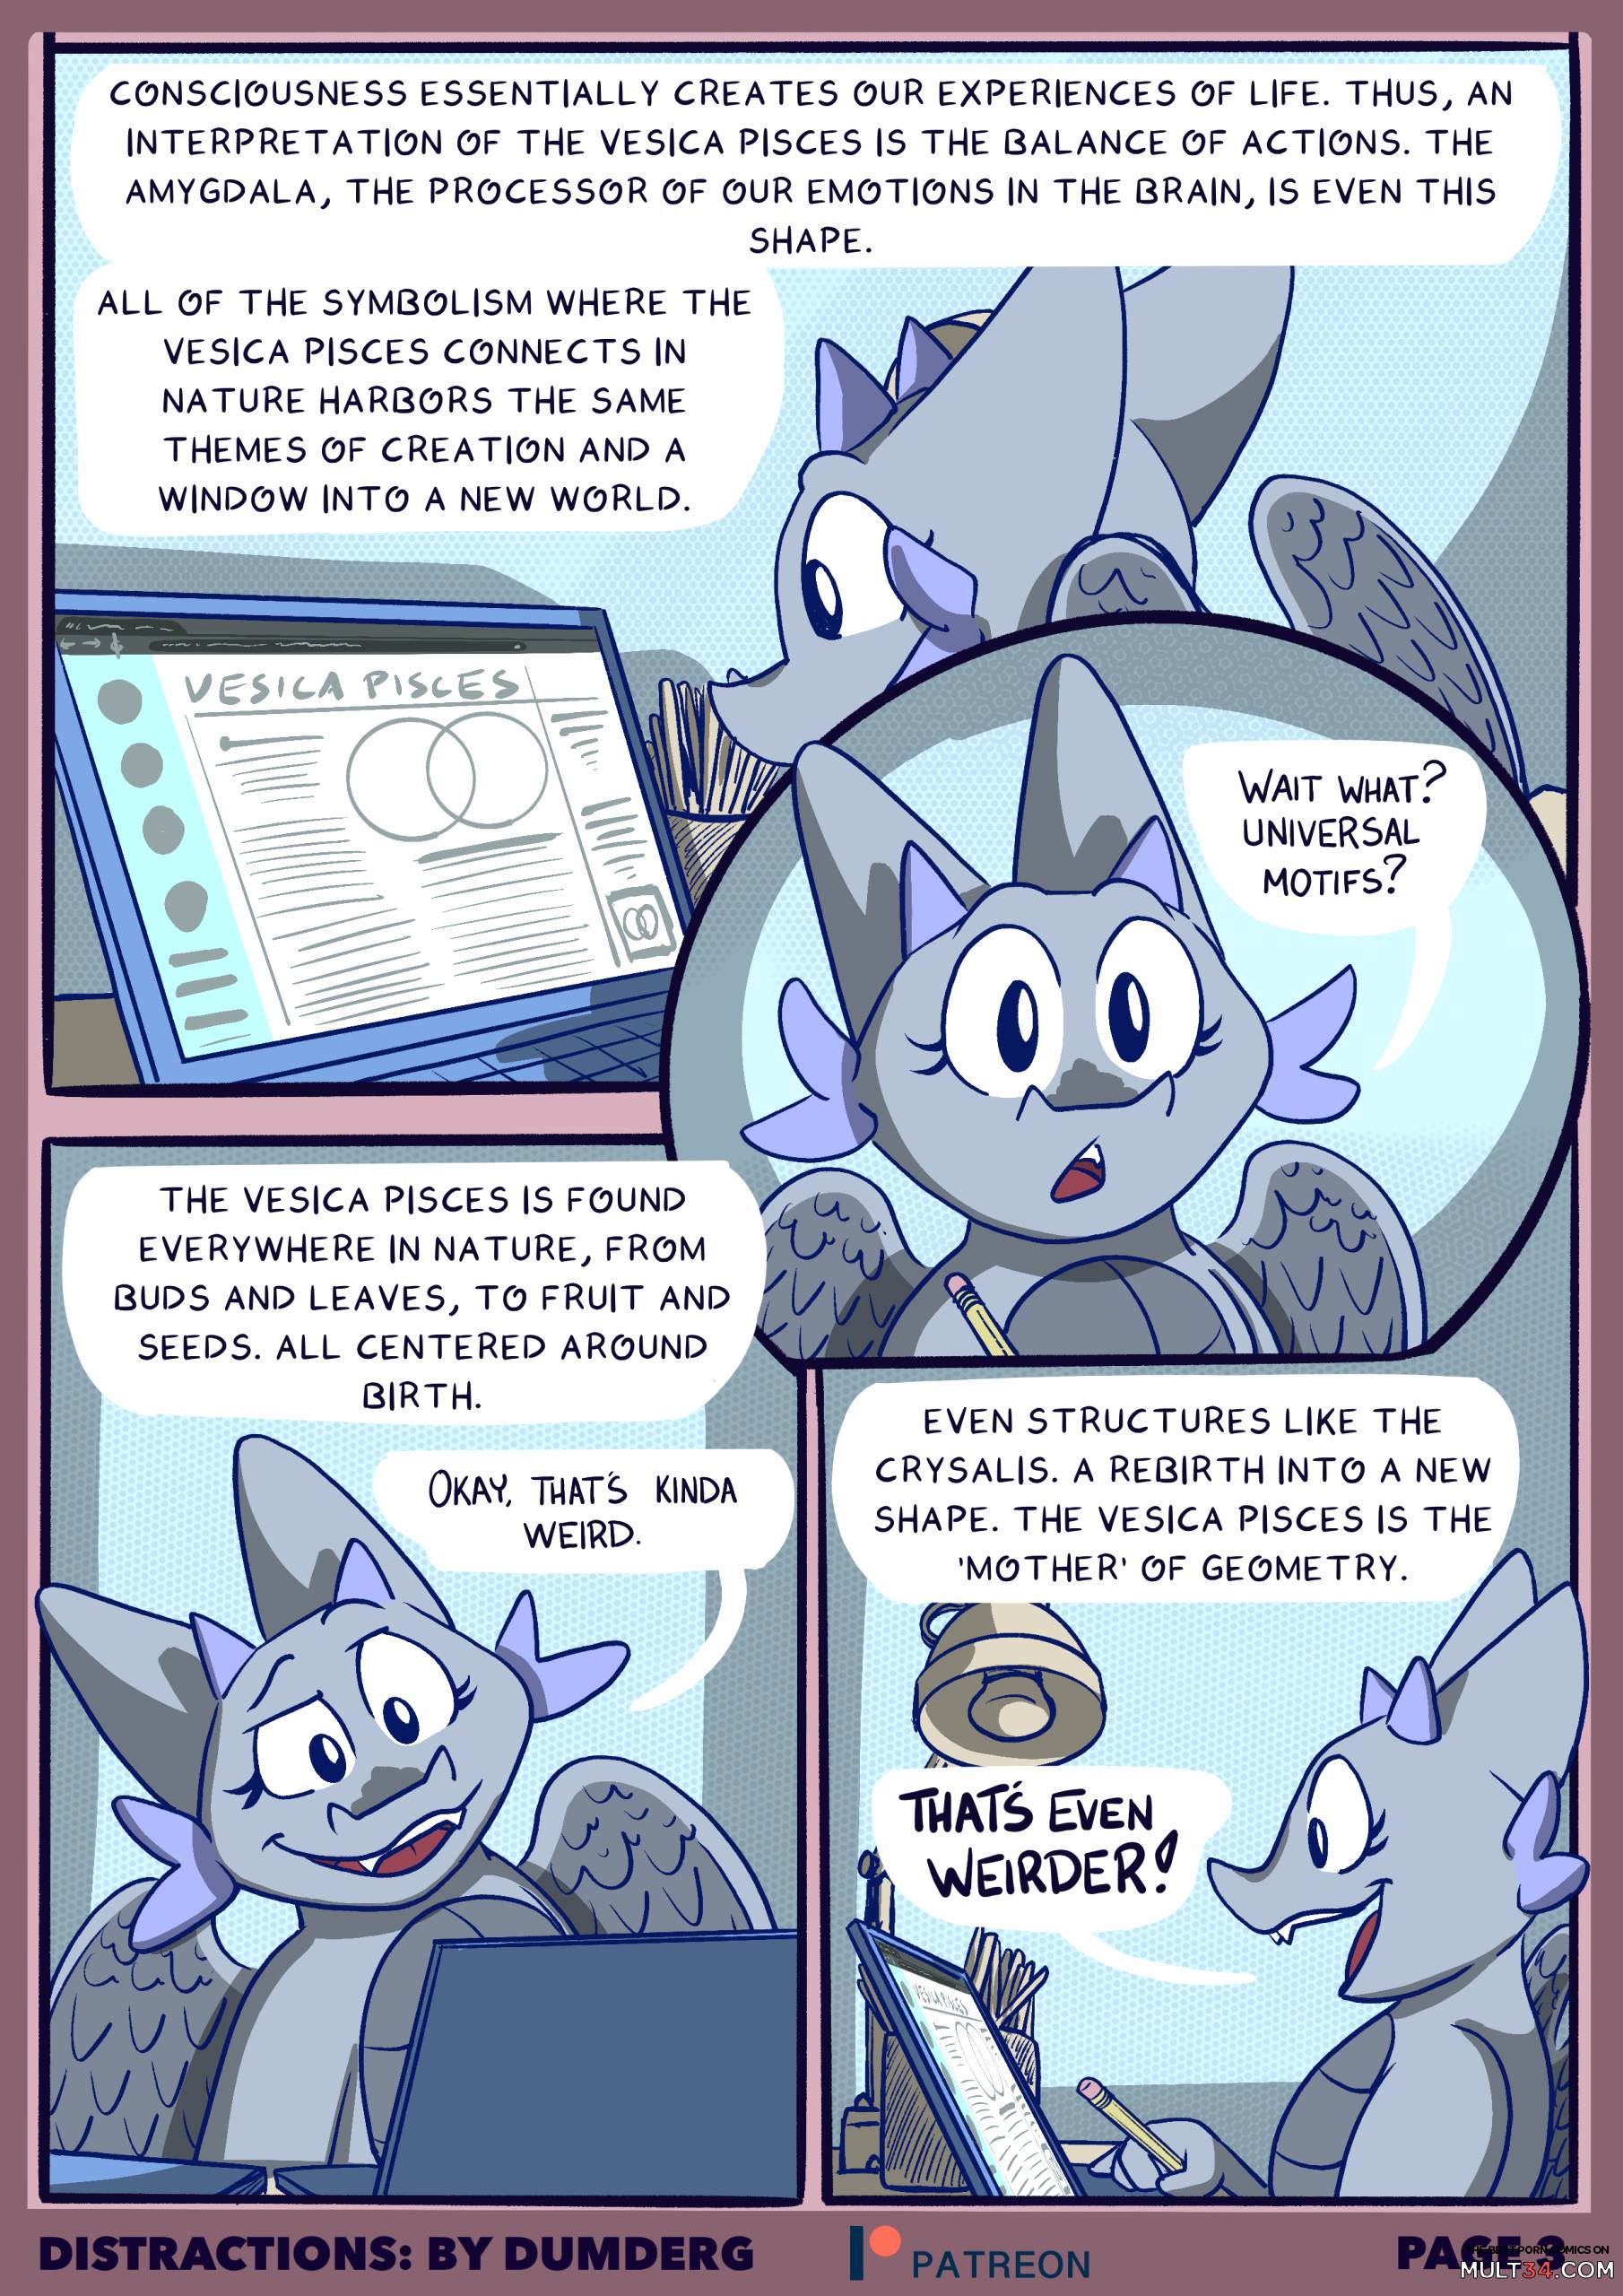 Distractions - DumDerg page 4